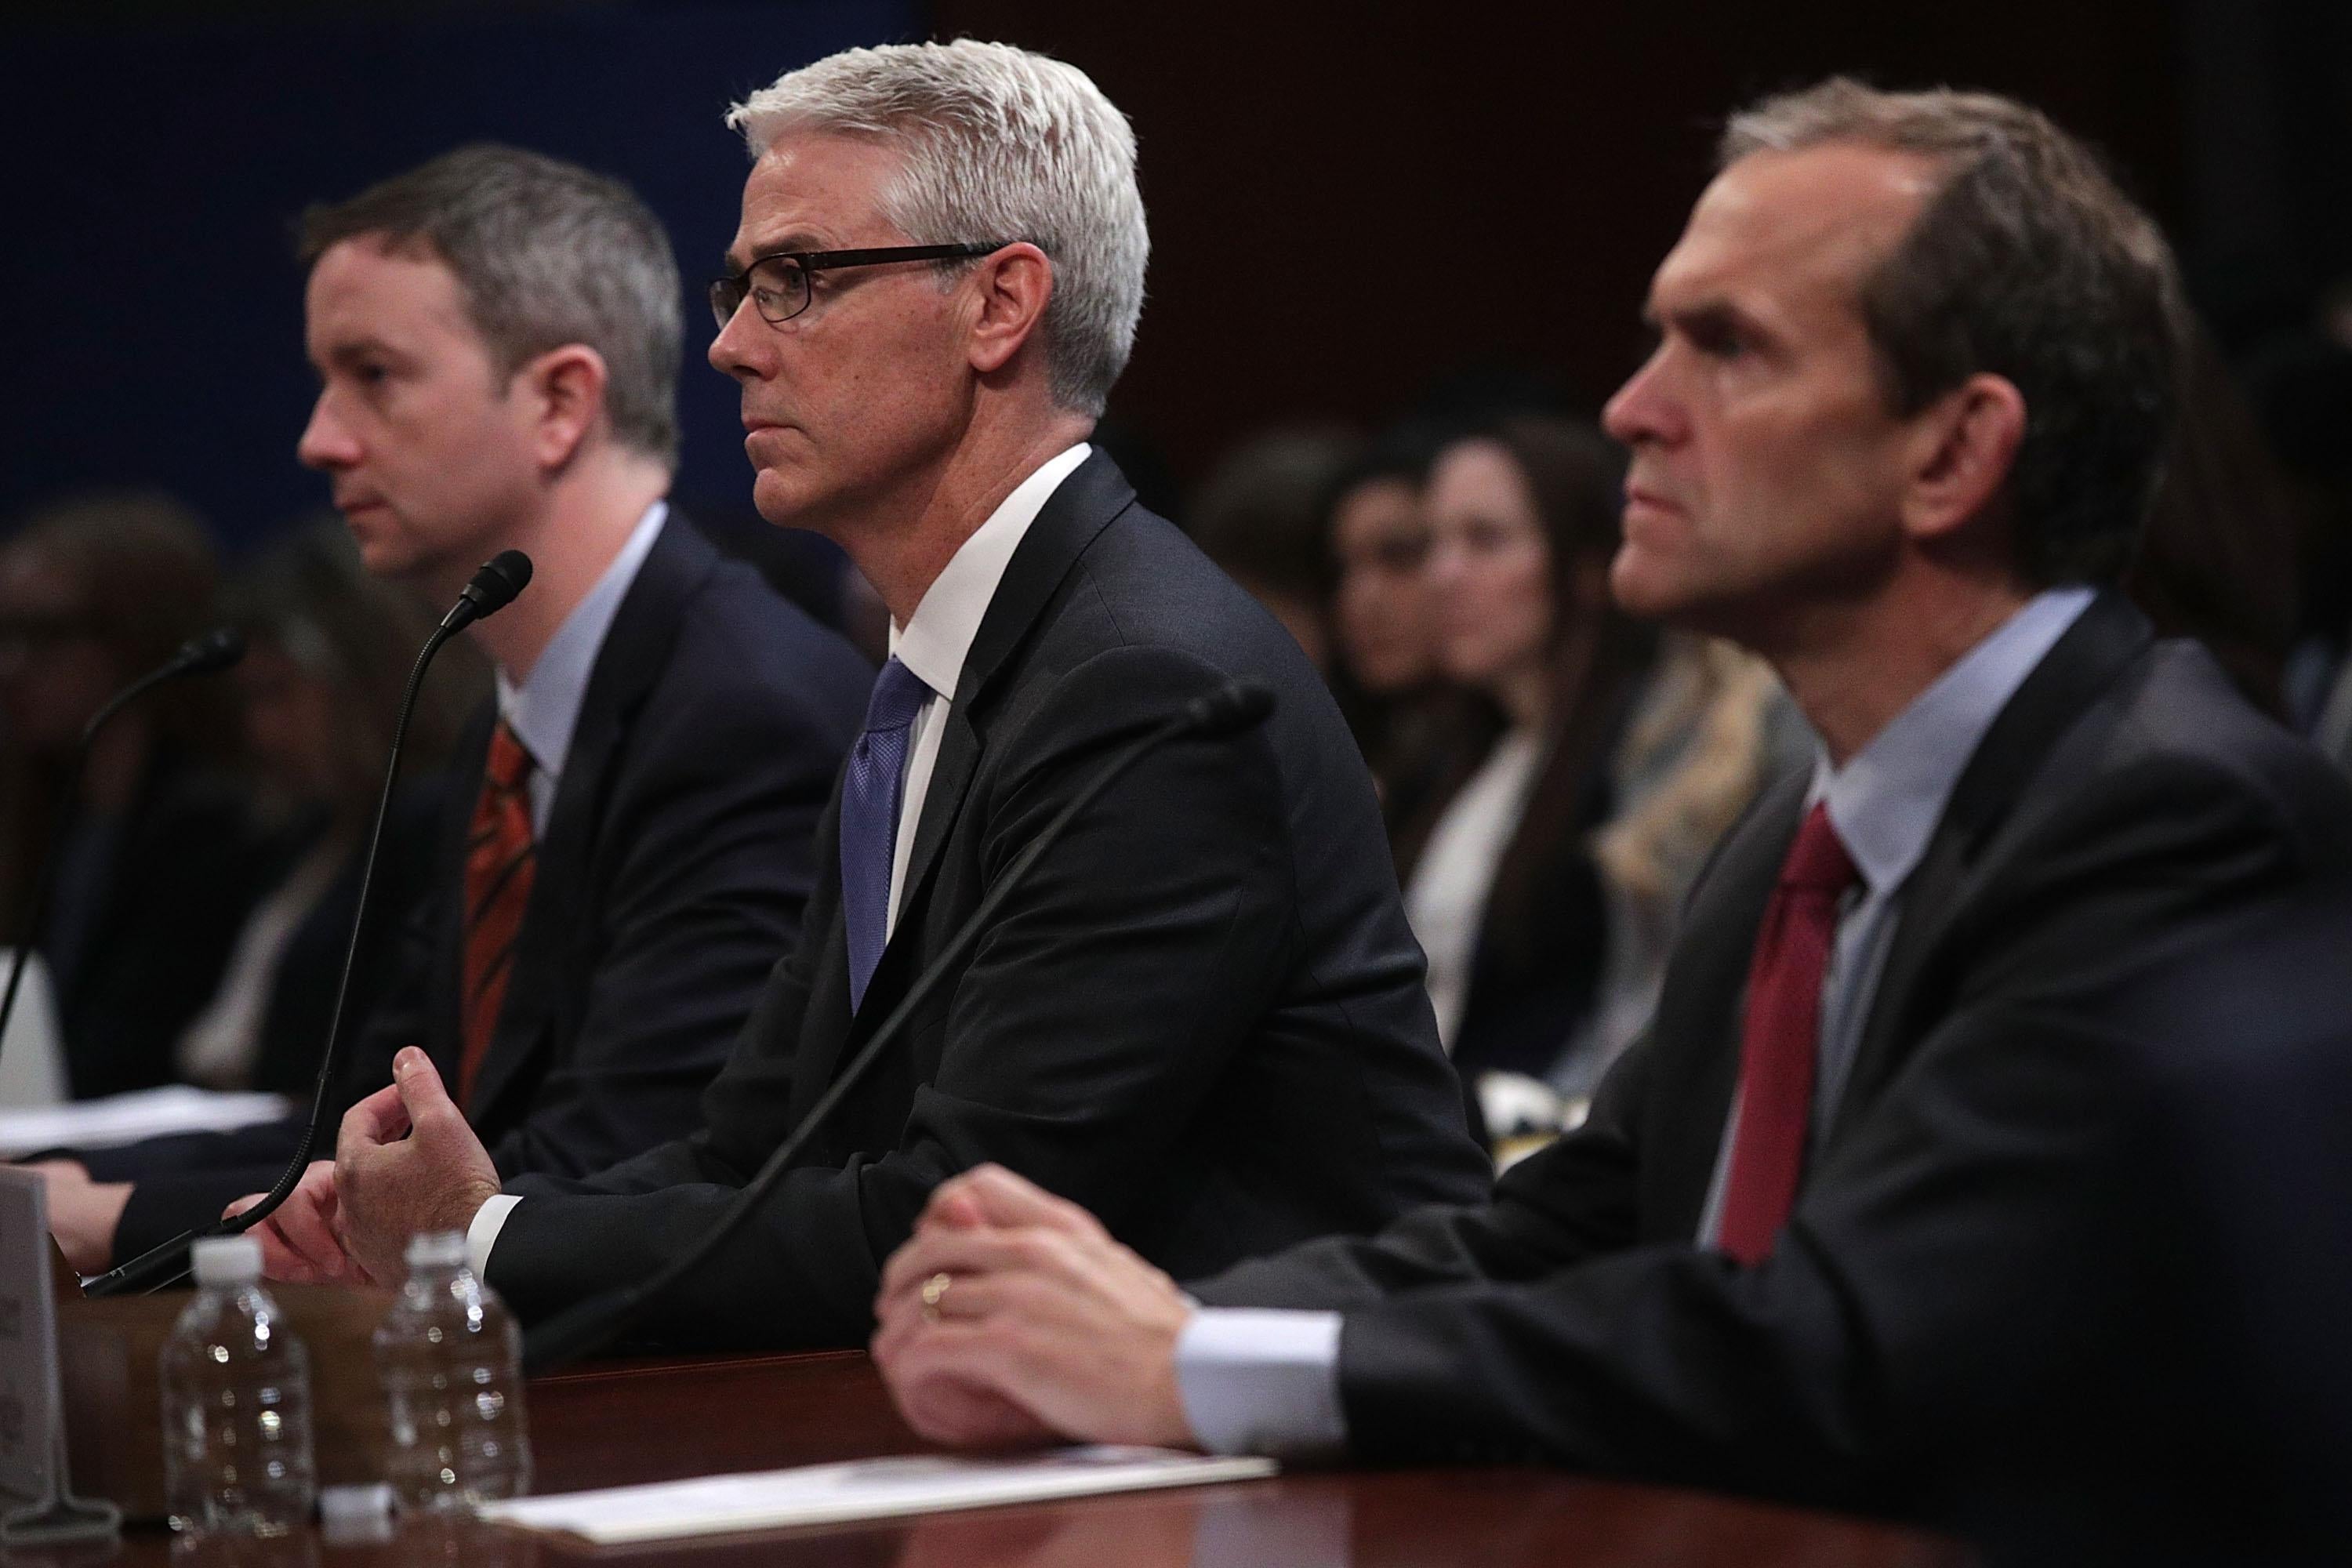 General counsel for Twitter Sean Edgett, Vice President and general counsel for Facebook Colin Stretch, and Senior Vice President and general counsel for Google Kent Walker testify during a hearing before the House (Select) Intelligence Committee.